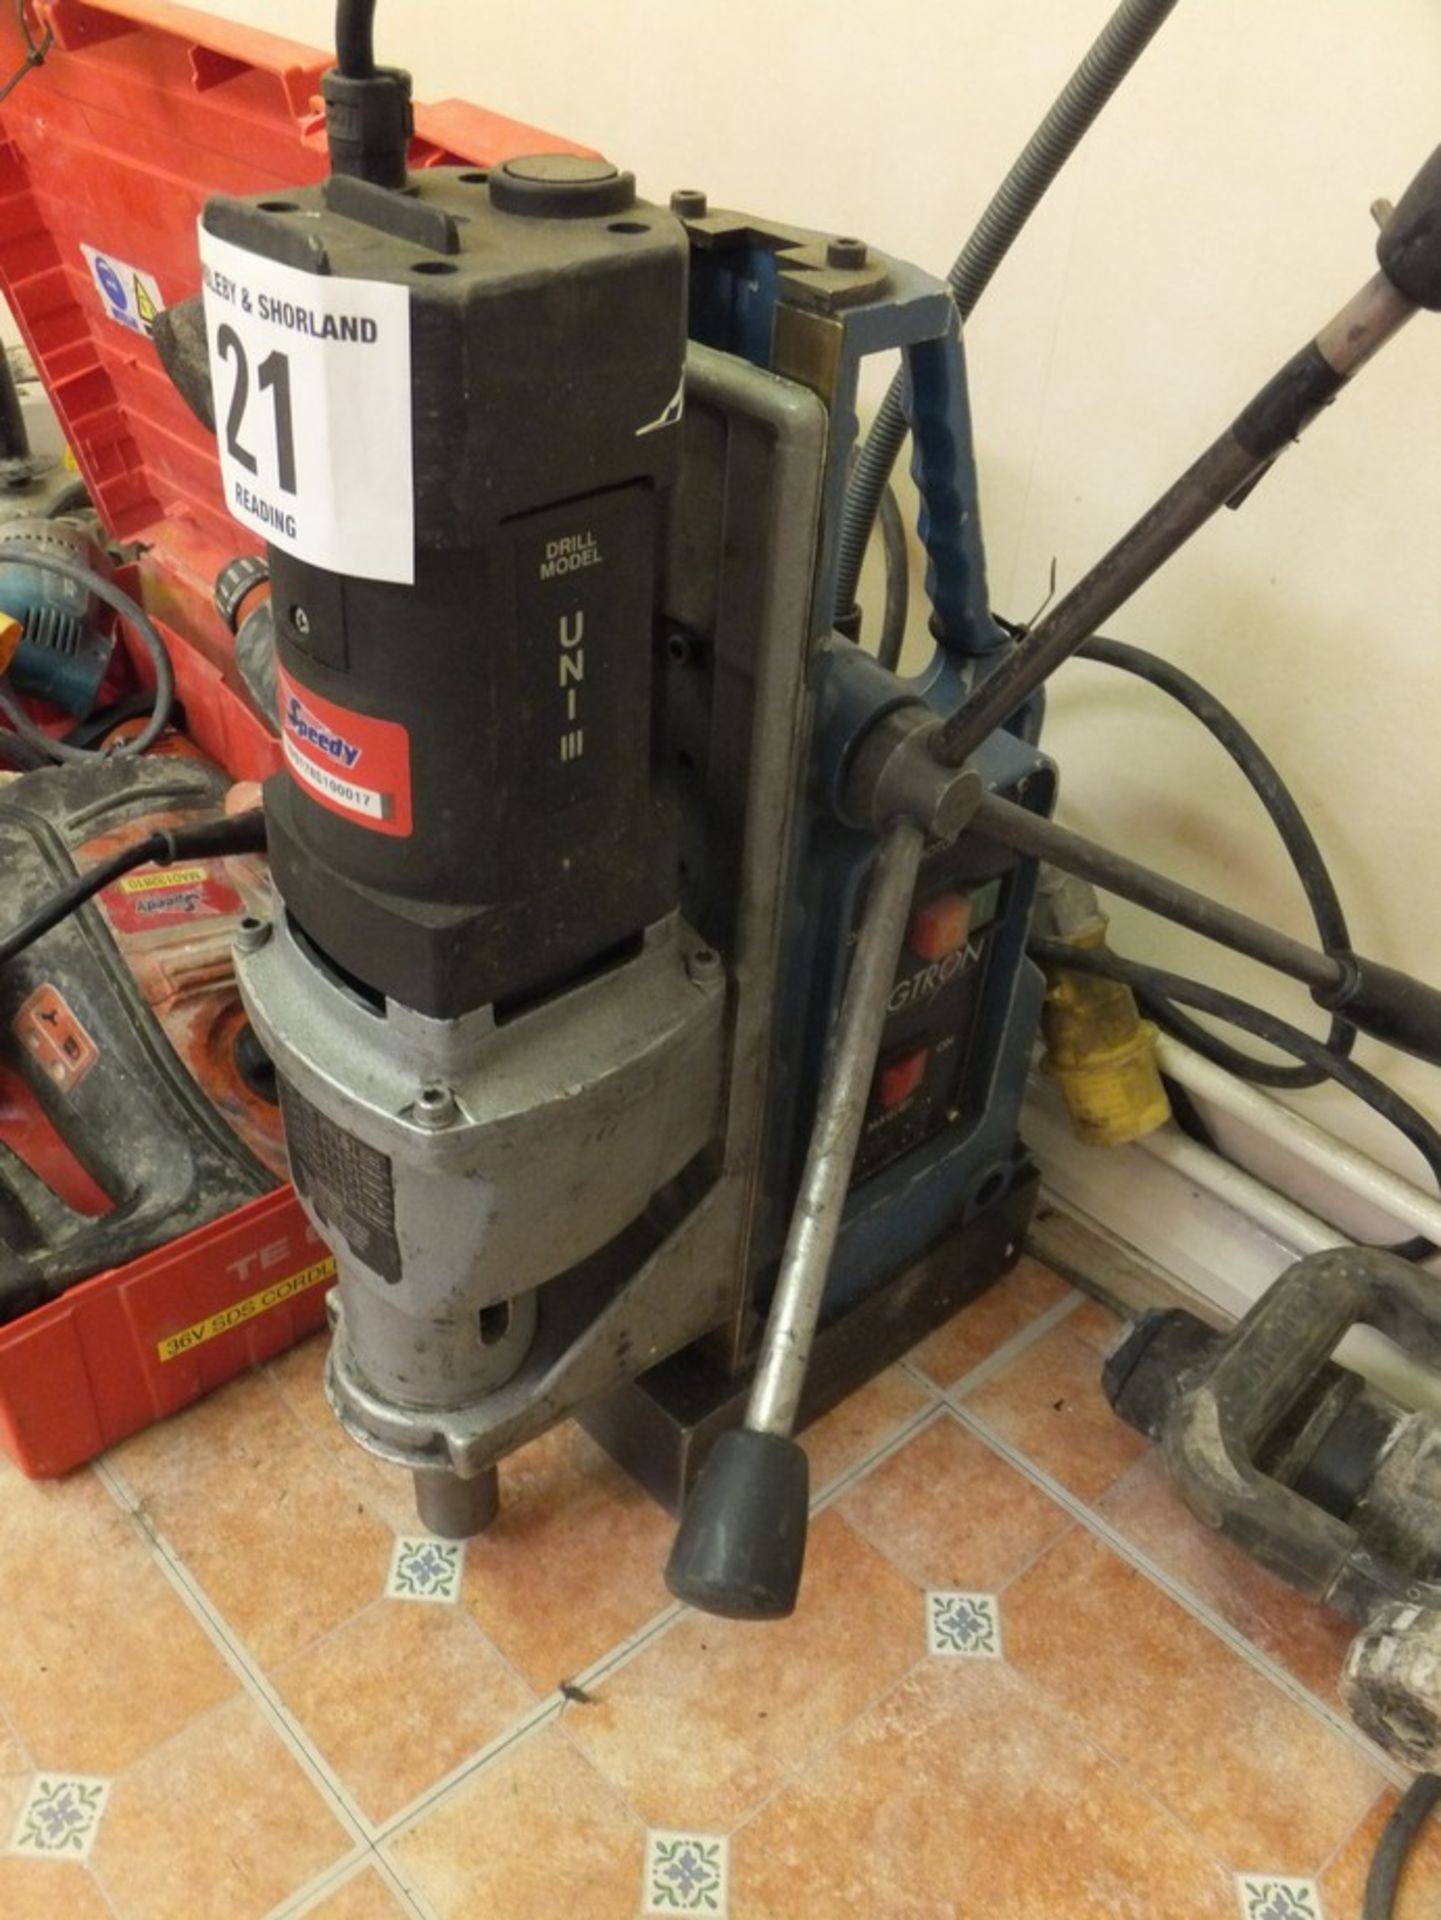 Magtron drill and stand